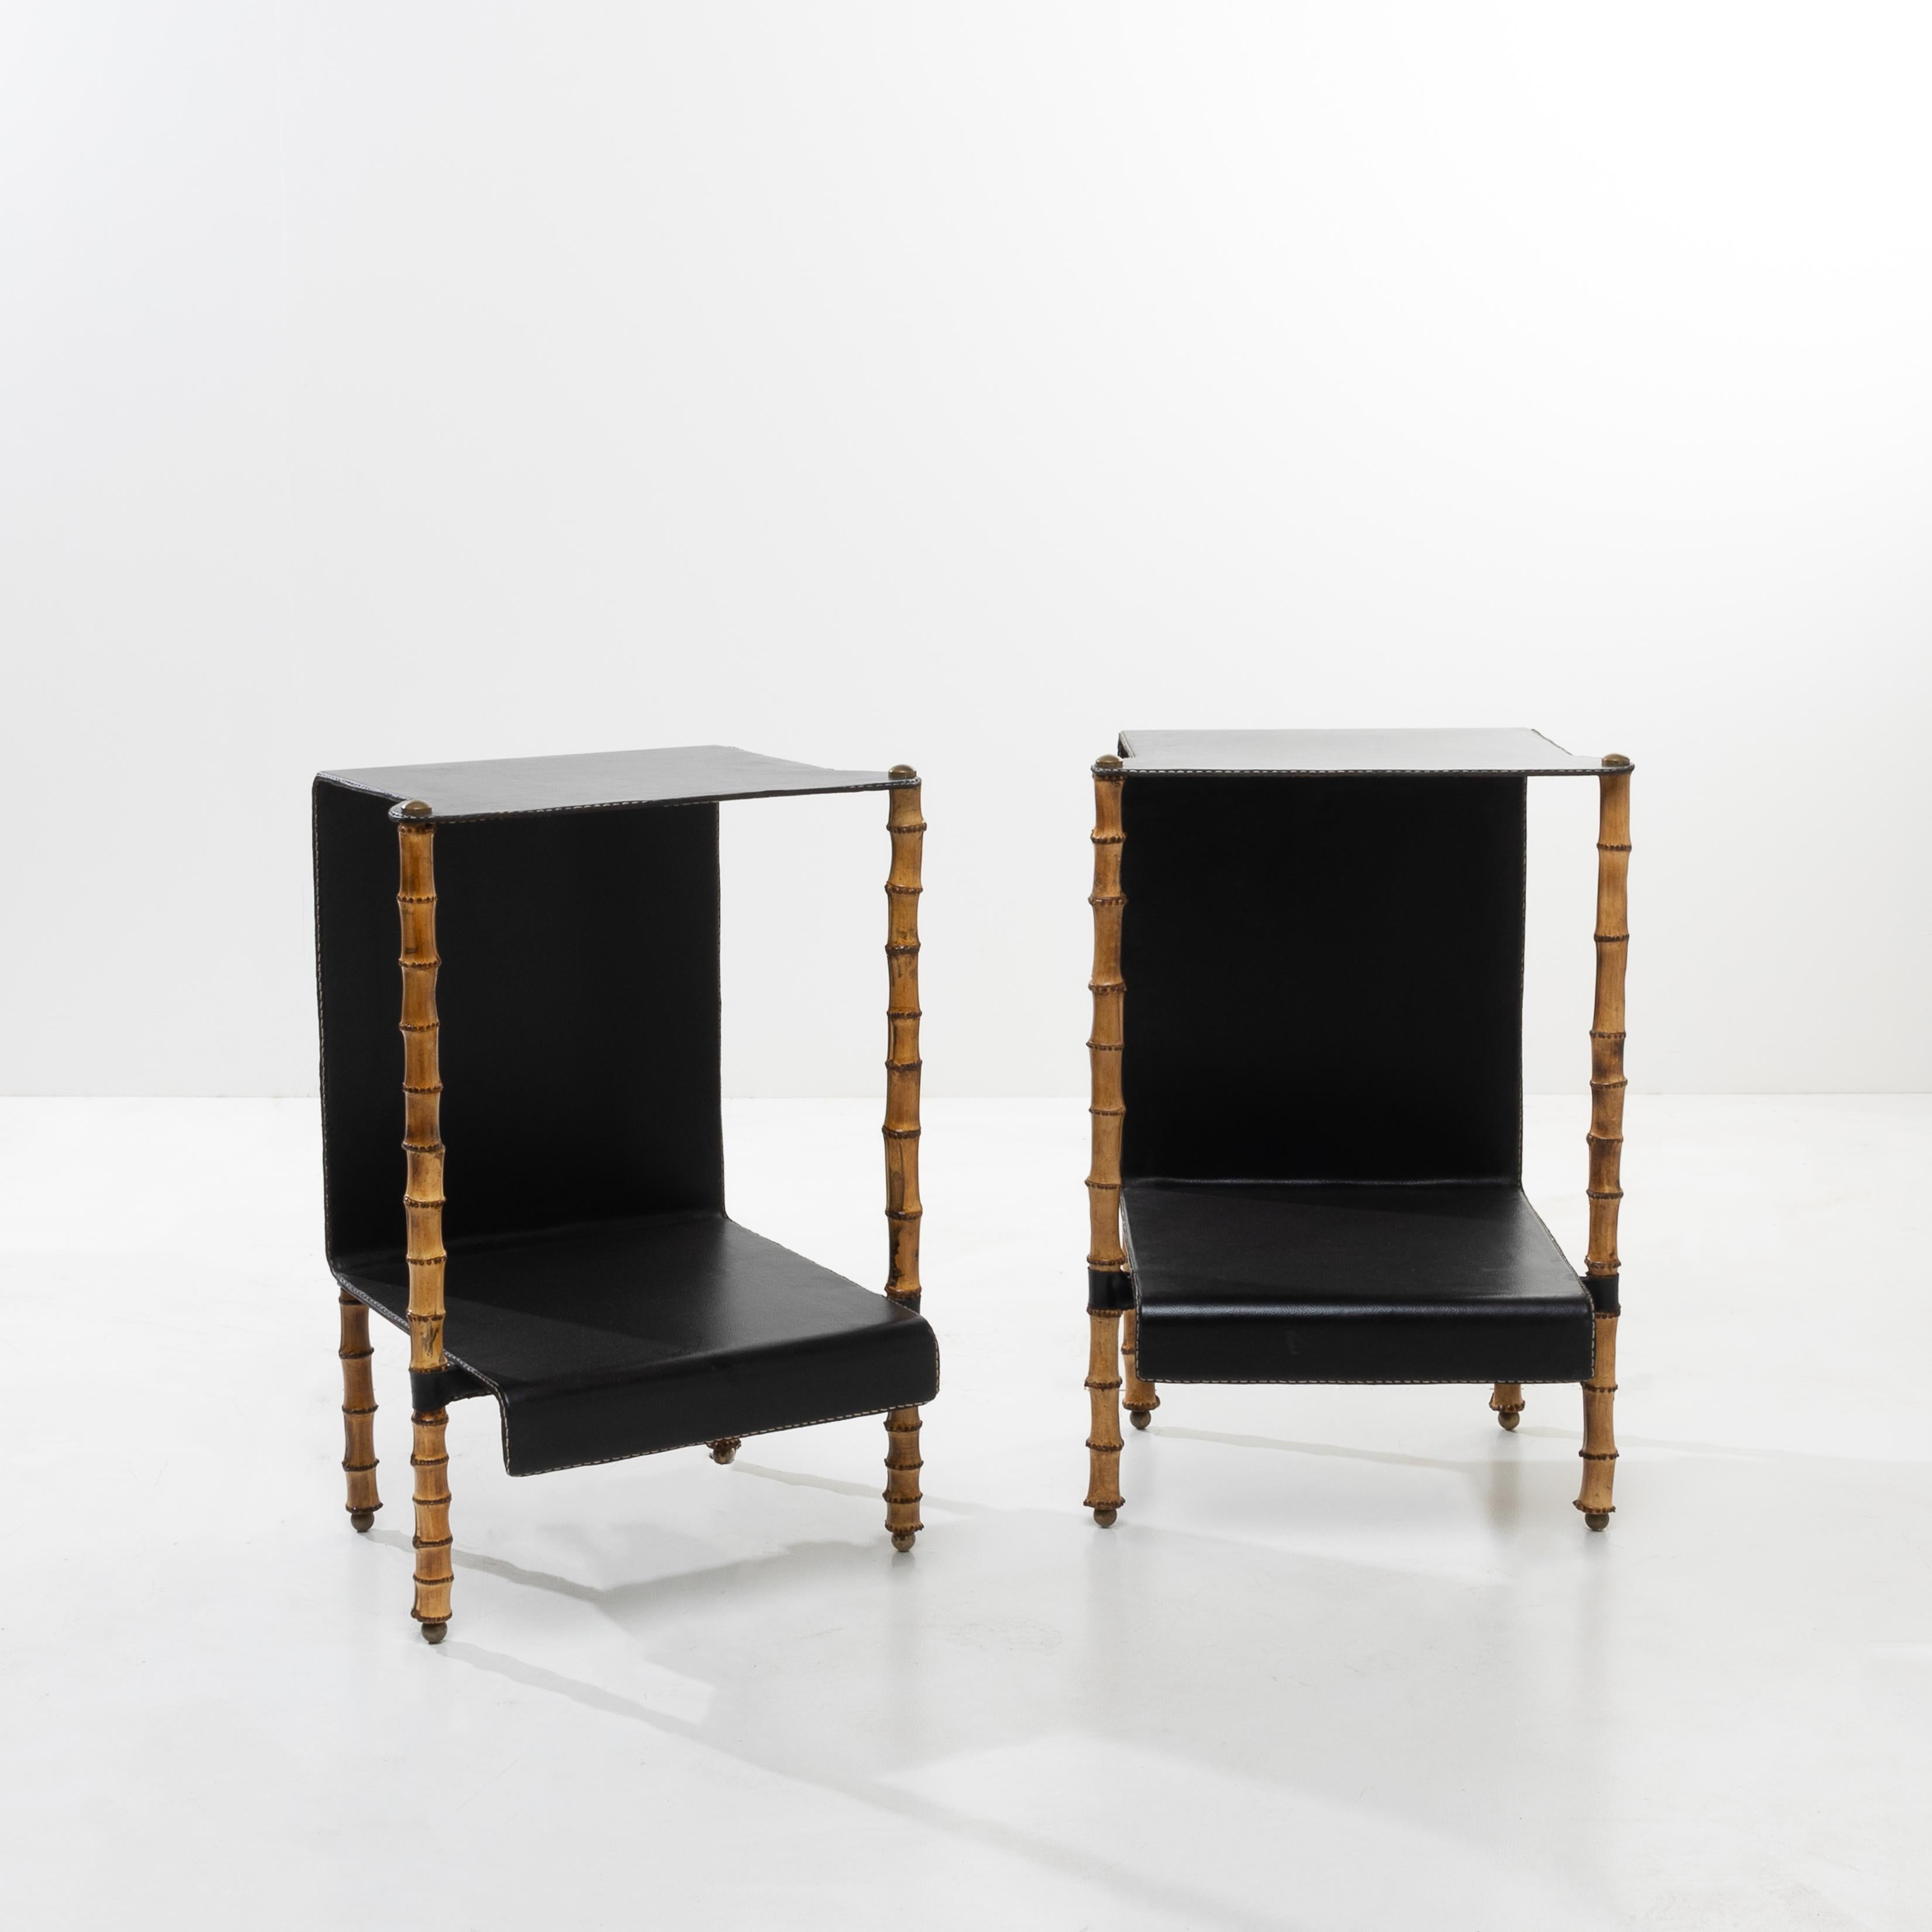 Pair of side tables in steel entirely covered in saddle stitched leather.
Particularly elegant in shape, these tables are made of a single sheet of steel forming the top, bottom and back of the table.
The steel sheet is then covered with saddle